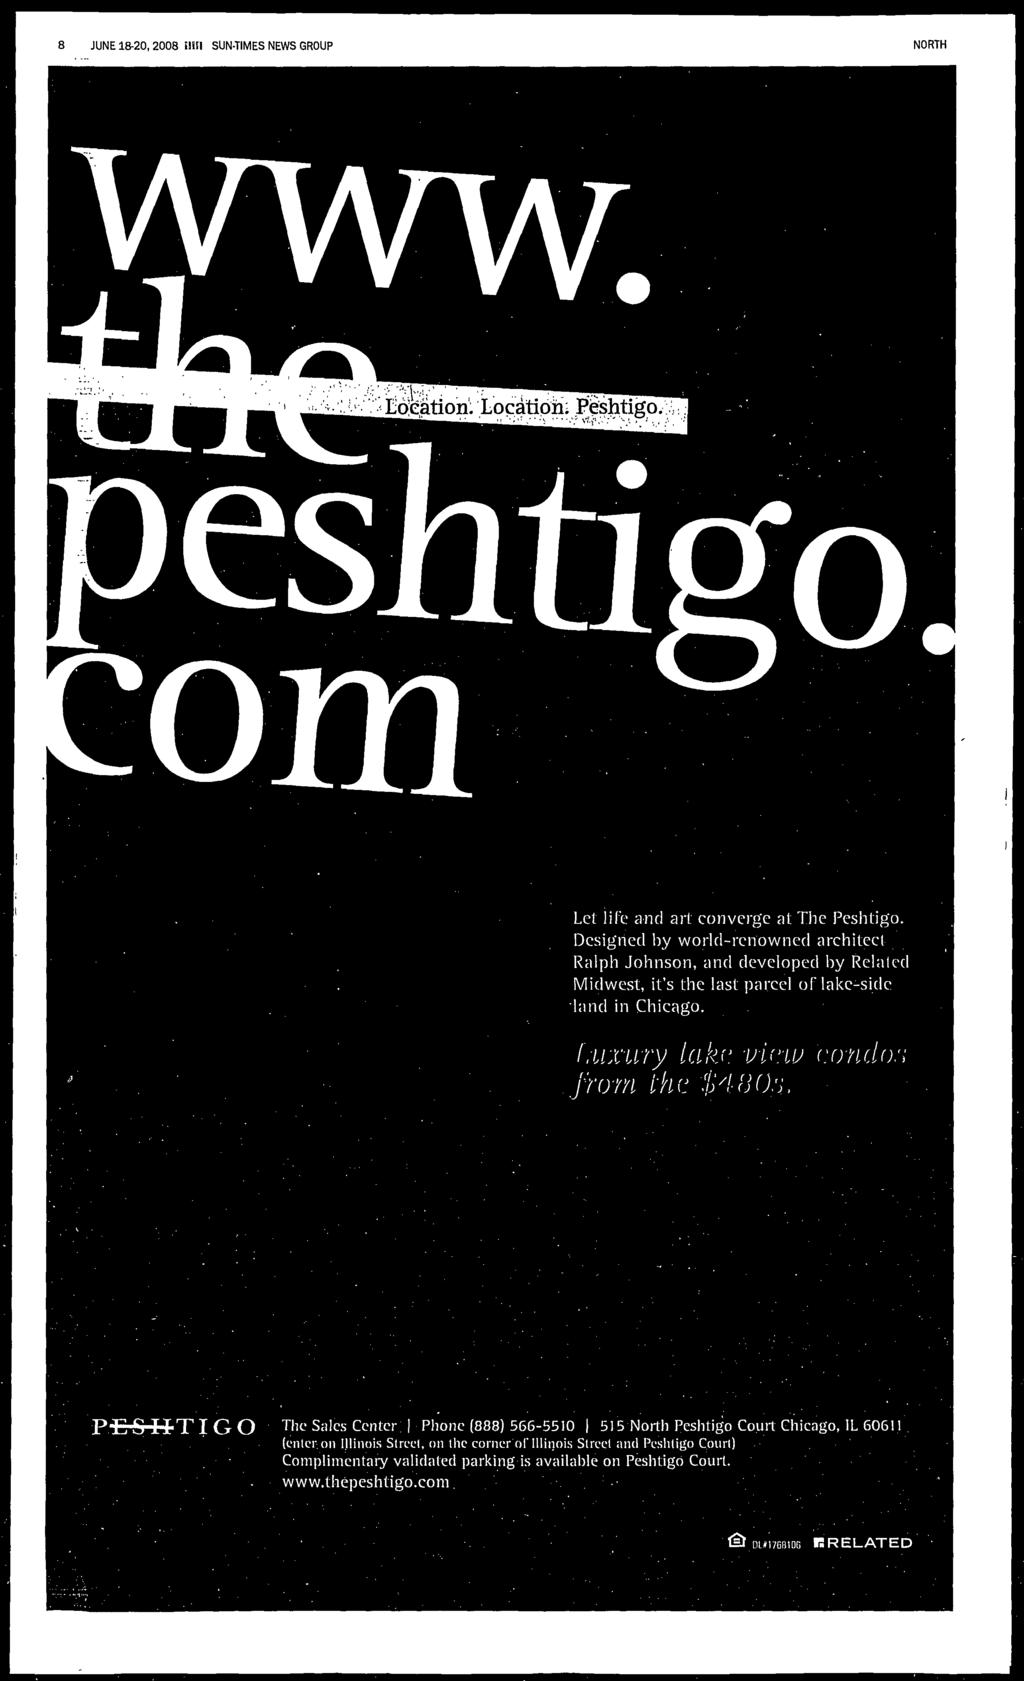 8 JUNE 1820, 2008 0111 SUNTMES NEWS GROUP olocàtiön Pesht Let lue and art converge at The Peshtigo Designed by worldrenowned architect Ralph Johnson, and developed by Relnied Midwest, it's the last